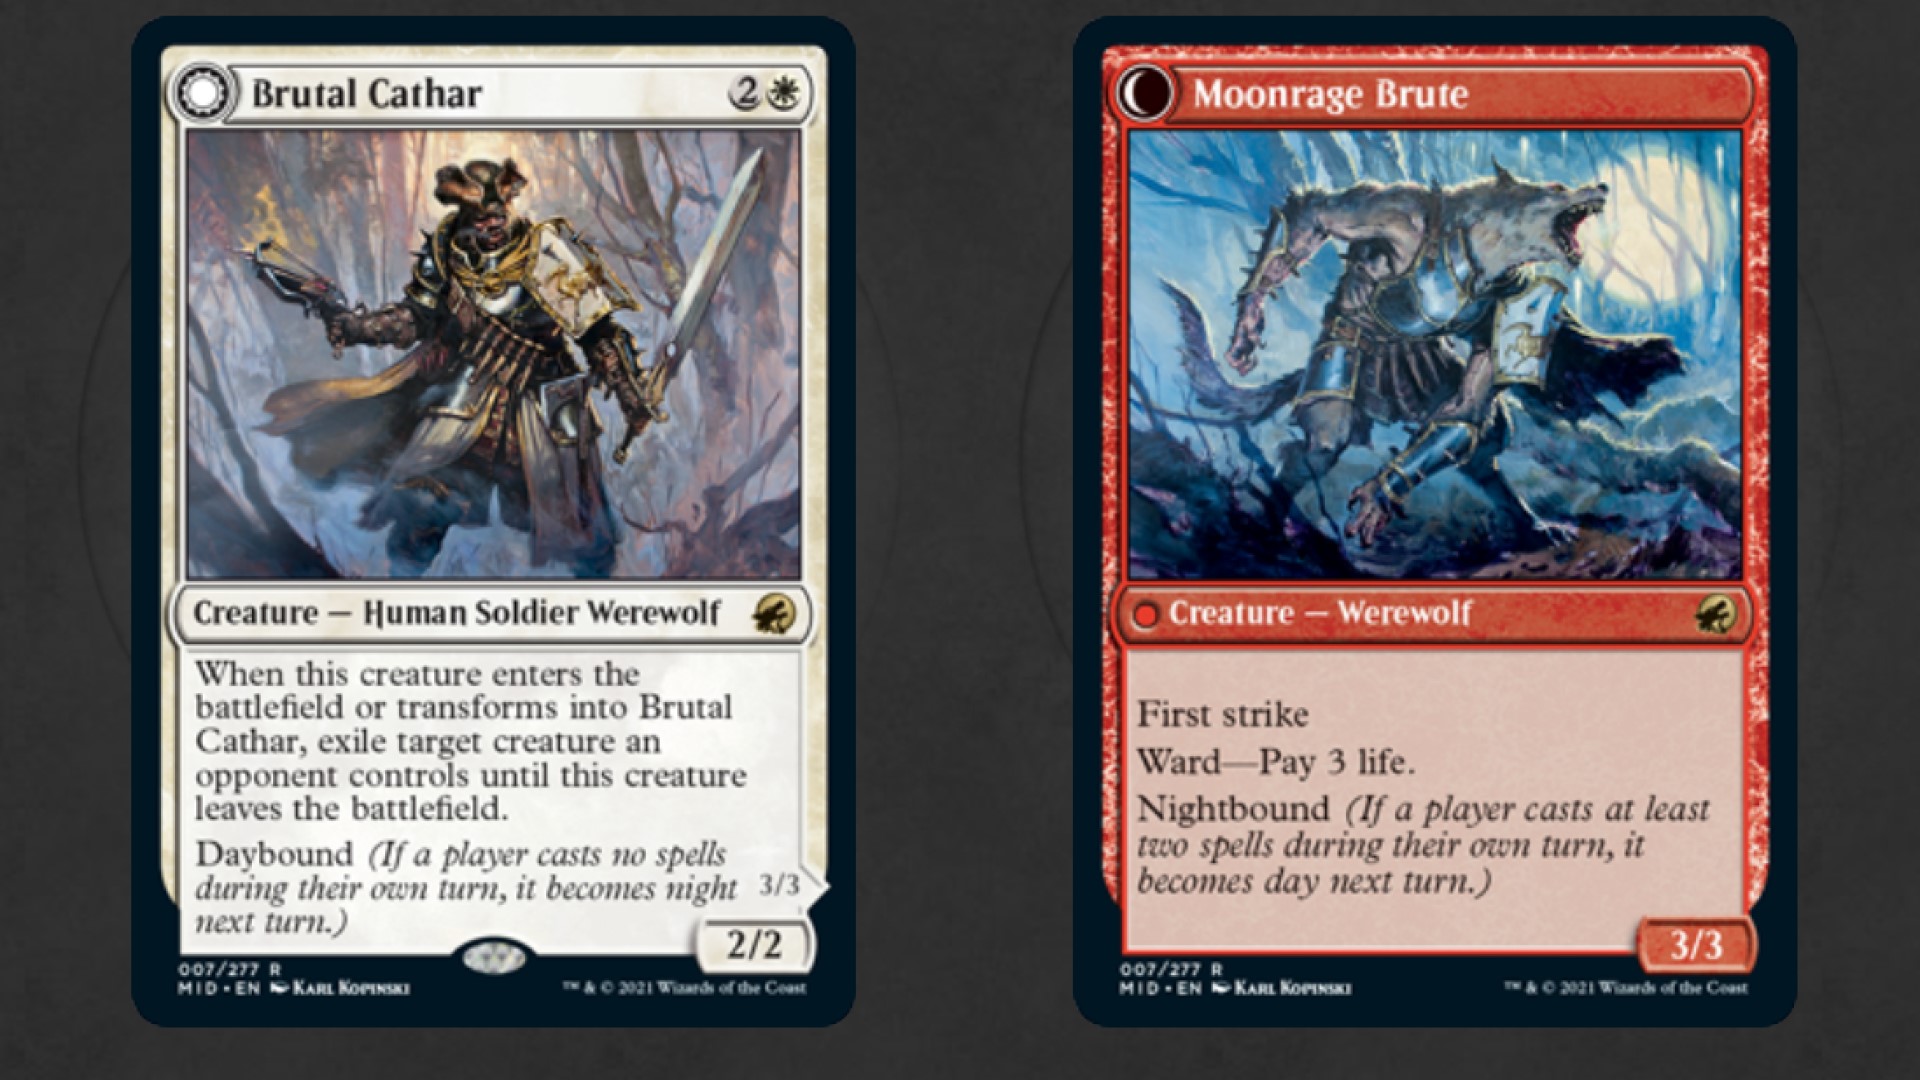 magic the gathering - the MTG card Brutal Cathar and its flipside Moonrage Brute.